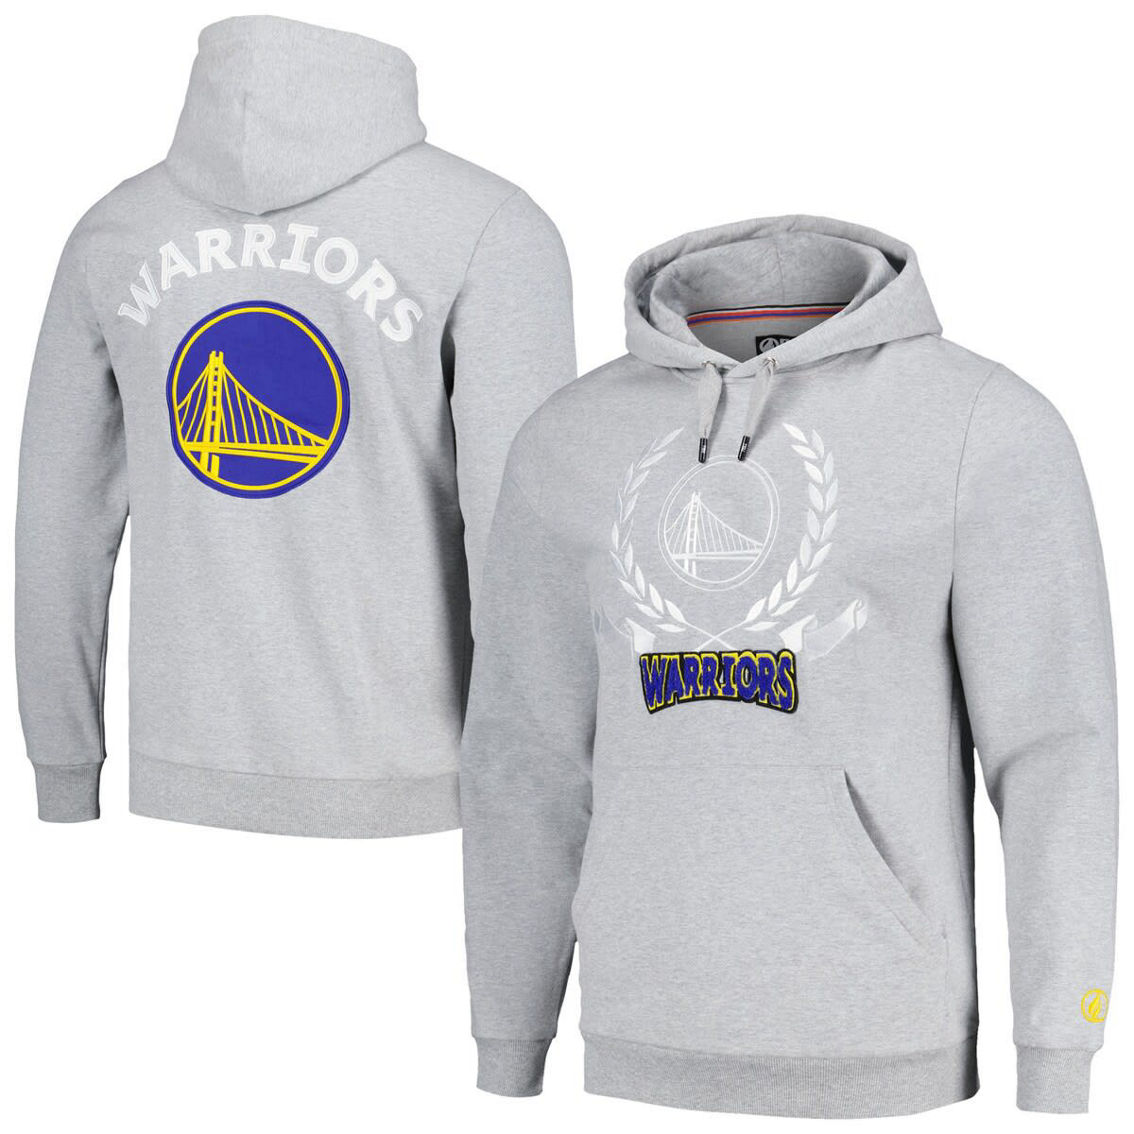 FISLL Unisex Heather Gray Golden State Warriors Heritage Crest Pullover Hoodie - Image 2 of 4